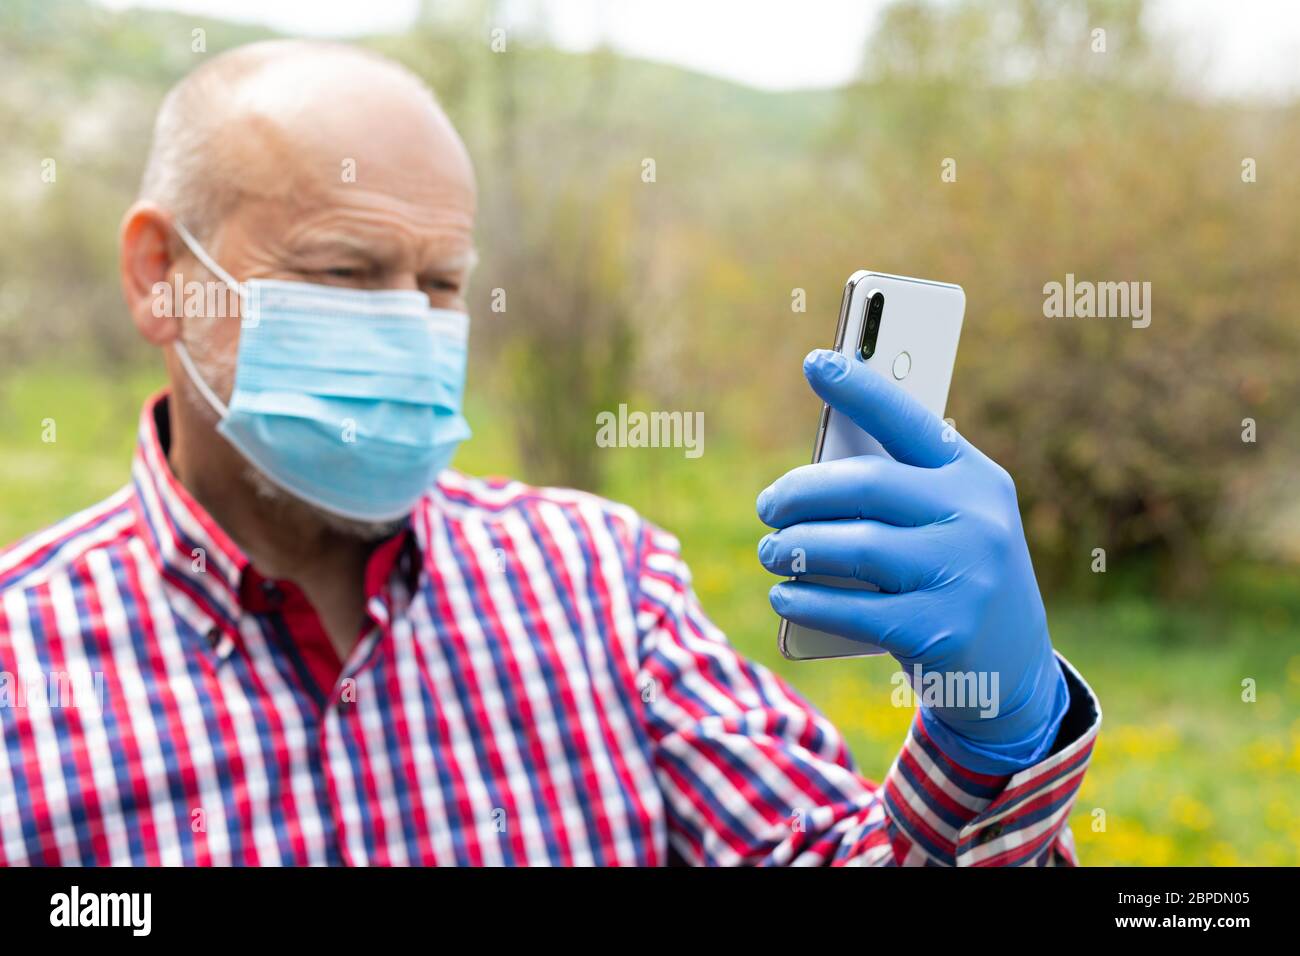 Elderly Man With Protective Mask And Gloves Talking To The